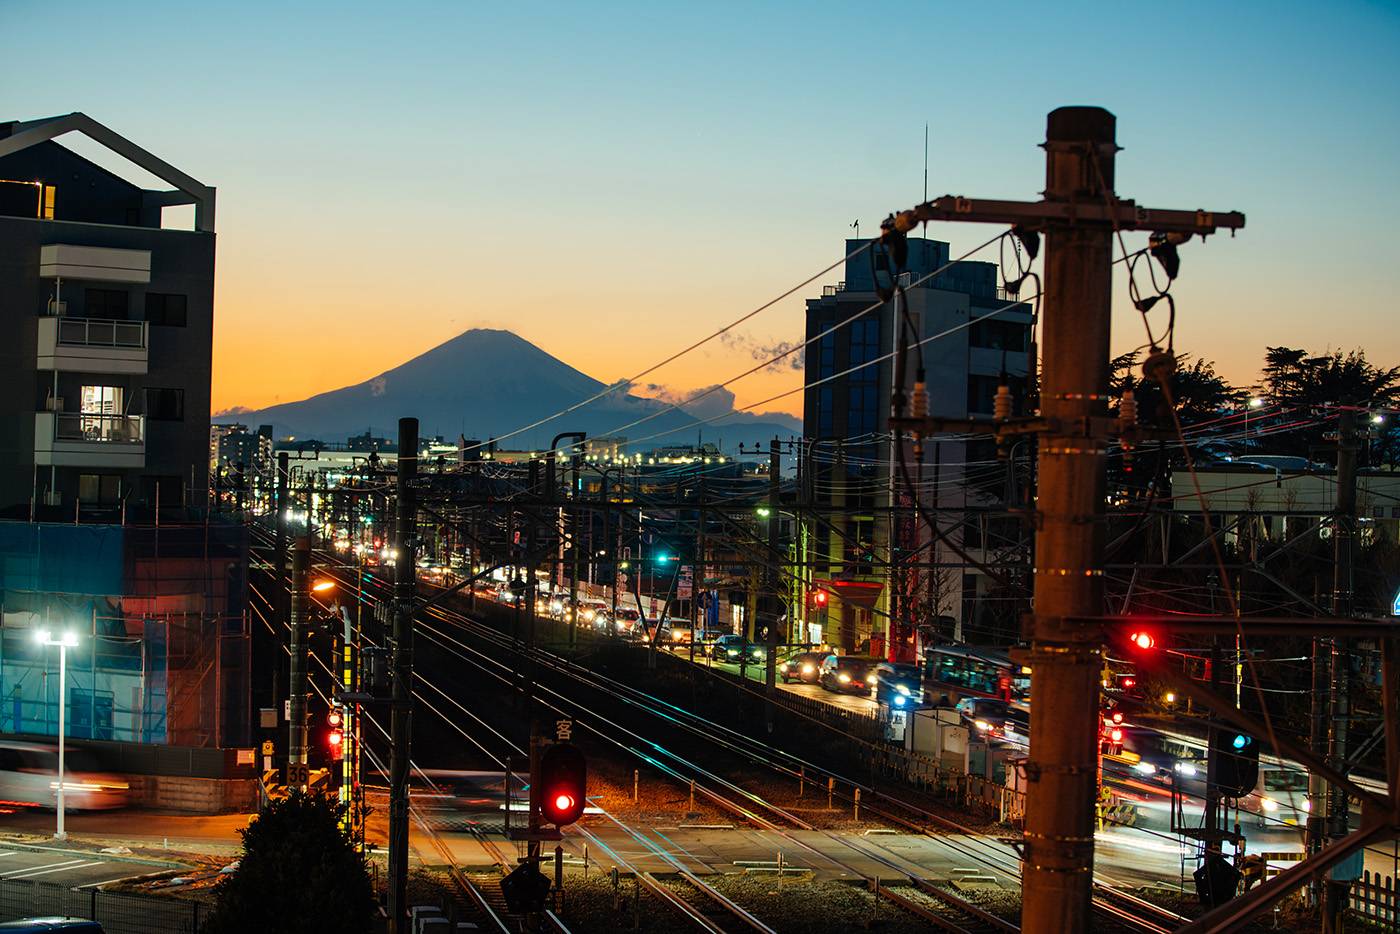 The picture of the railroad crossing with beautiful sunset sky and silhouette of Mt Fuji.